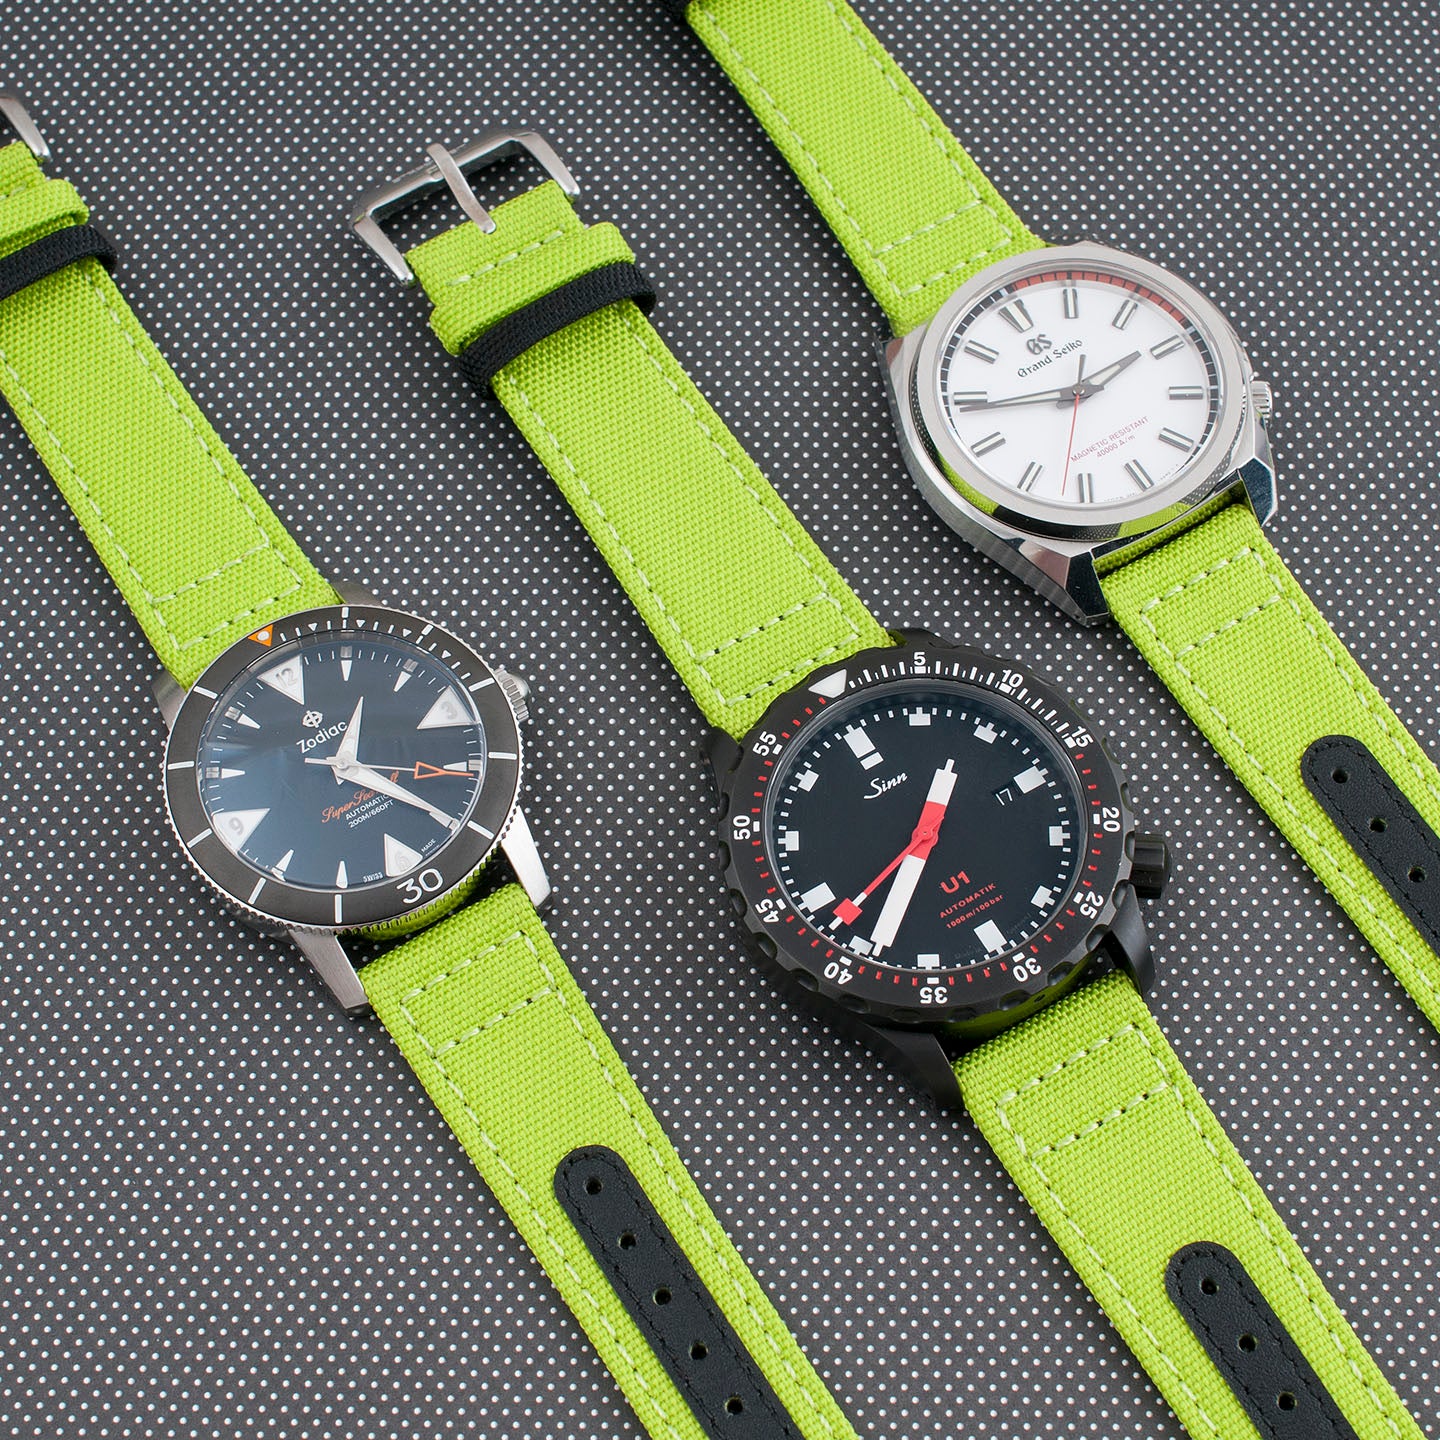 Premium Sailcloth Colorway Quick Release Watch Strap band replacement 19mm, 20mm, 21mm, 22mm for large wrists and small wrists, for men and women, unisex acid bright yellow brain green antifreeze Zodiac Super Sea Wolf 53 Skin sinn U1 S gran seiko SBGX341 